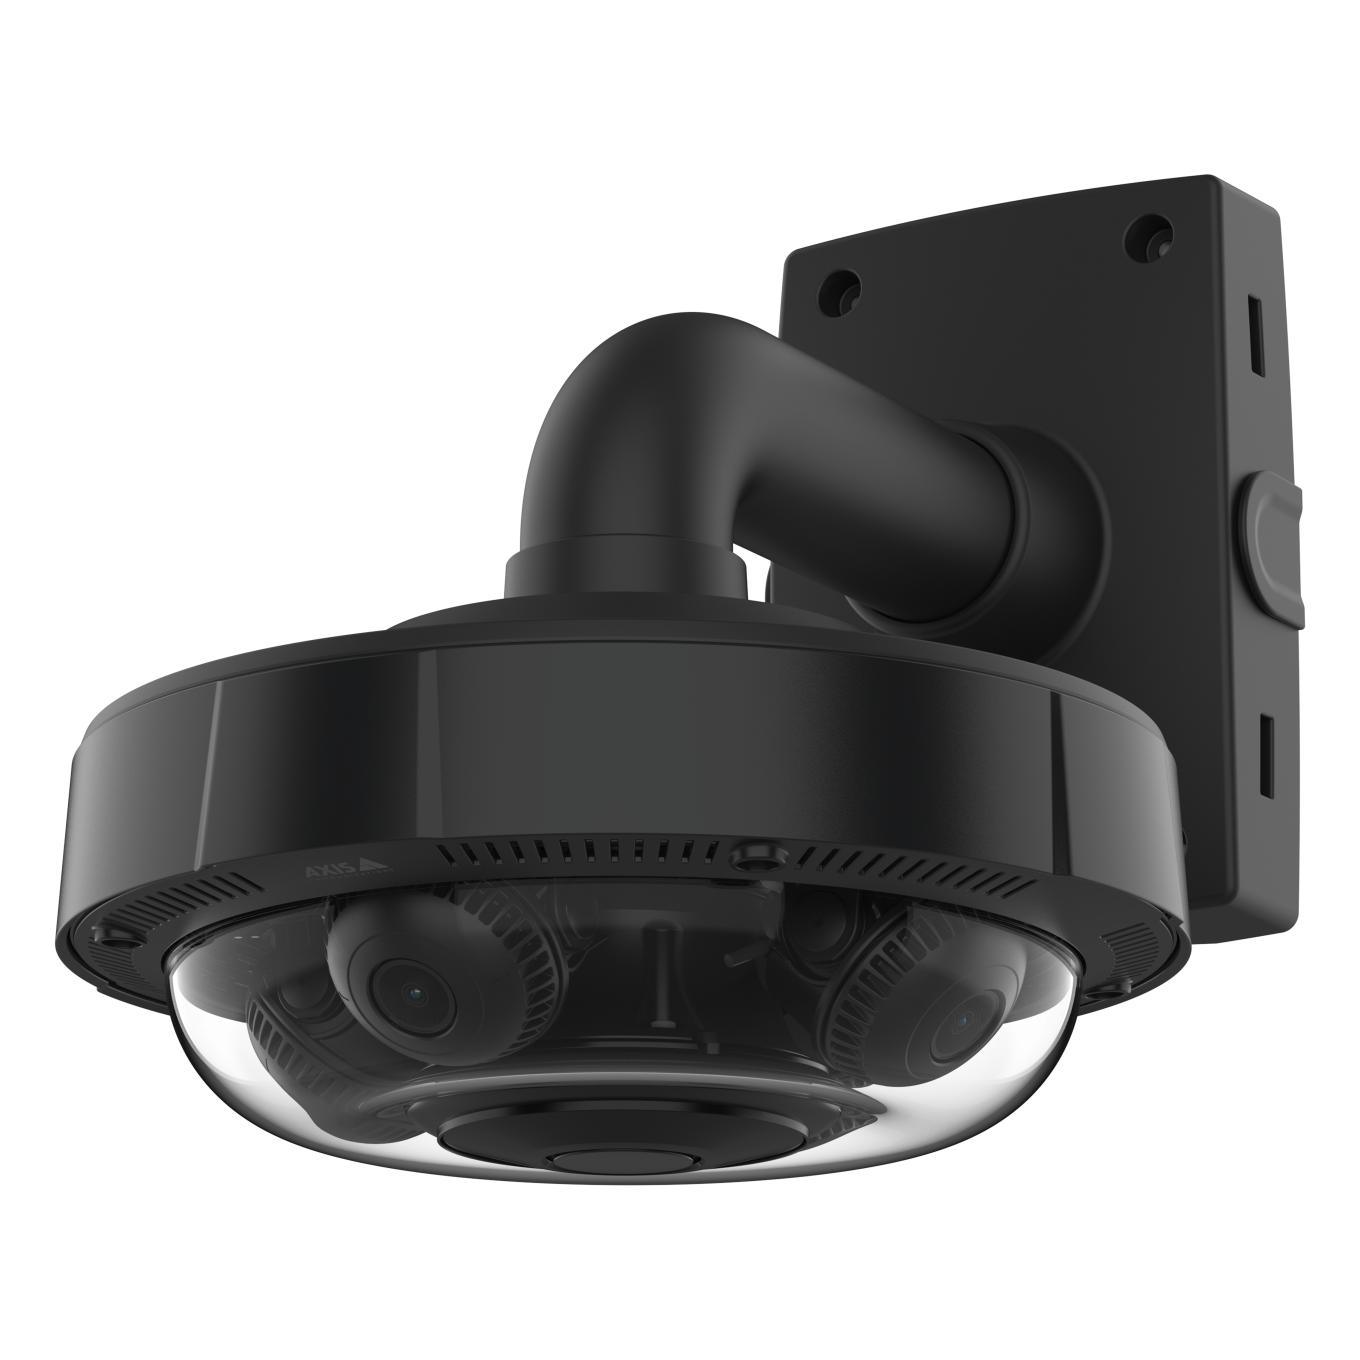 AXIS P3735-PLE with TP3301-E and TP3105-E for wall ceiling. The camera is viewed from its left angle.